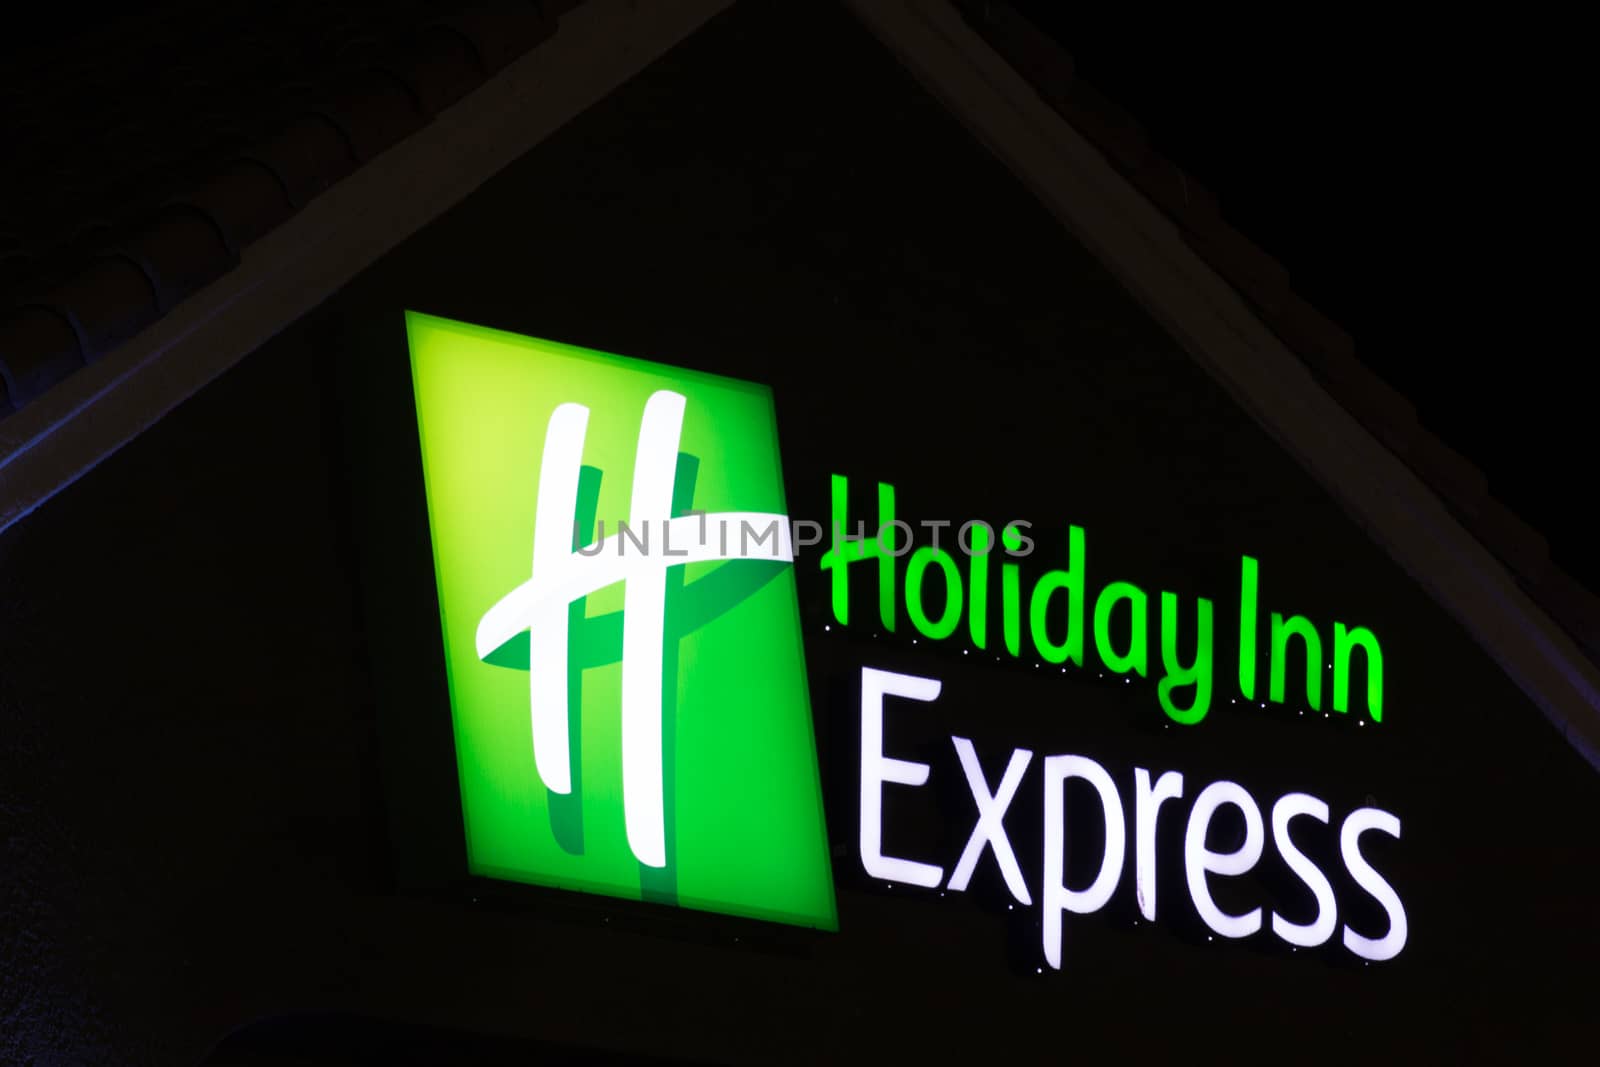 LANCASTER, CA/USA - APRIL 19, 2014: Holiday Inn Express Sign at night. Holiday Inn Express is a mid-priced hotel chain branded by InterContinental Hotels Group.